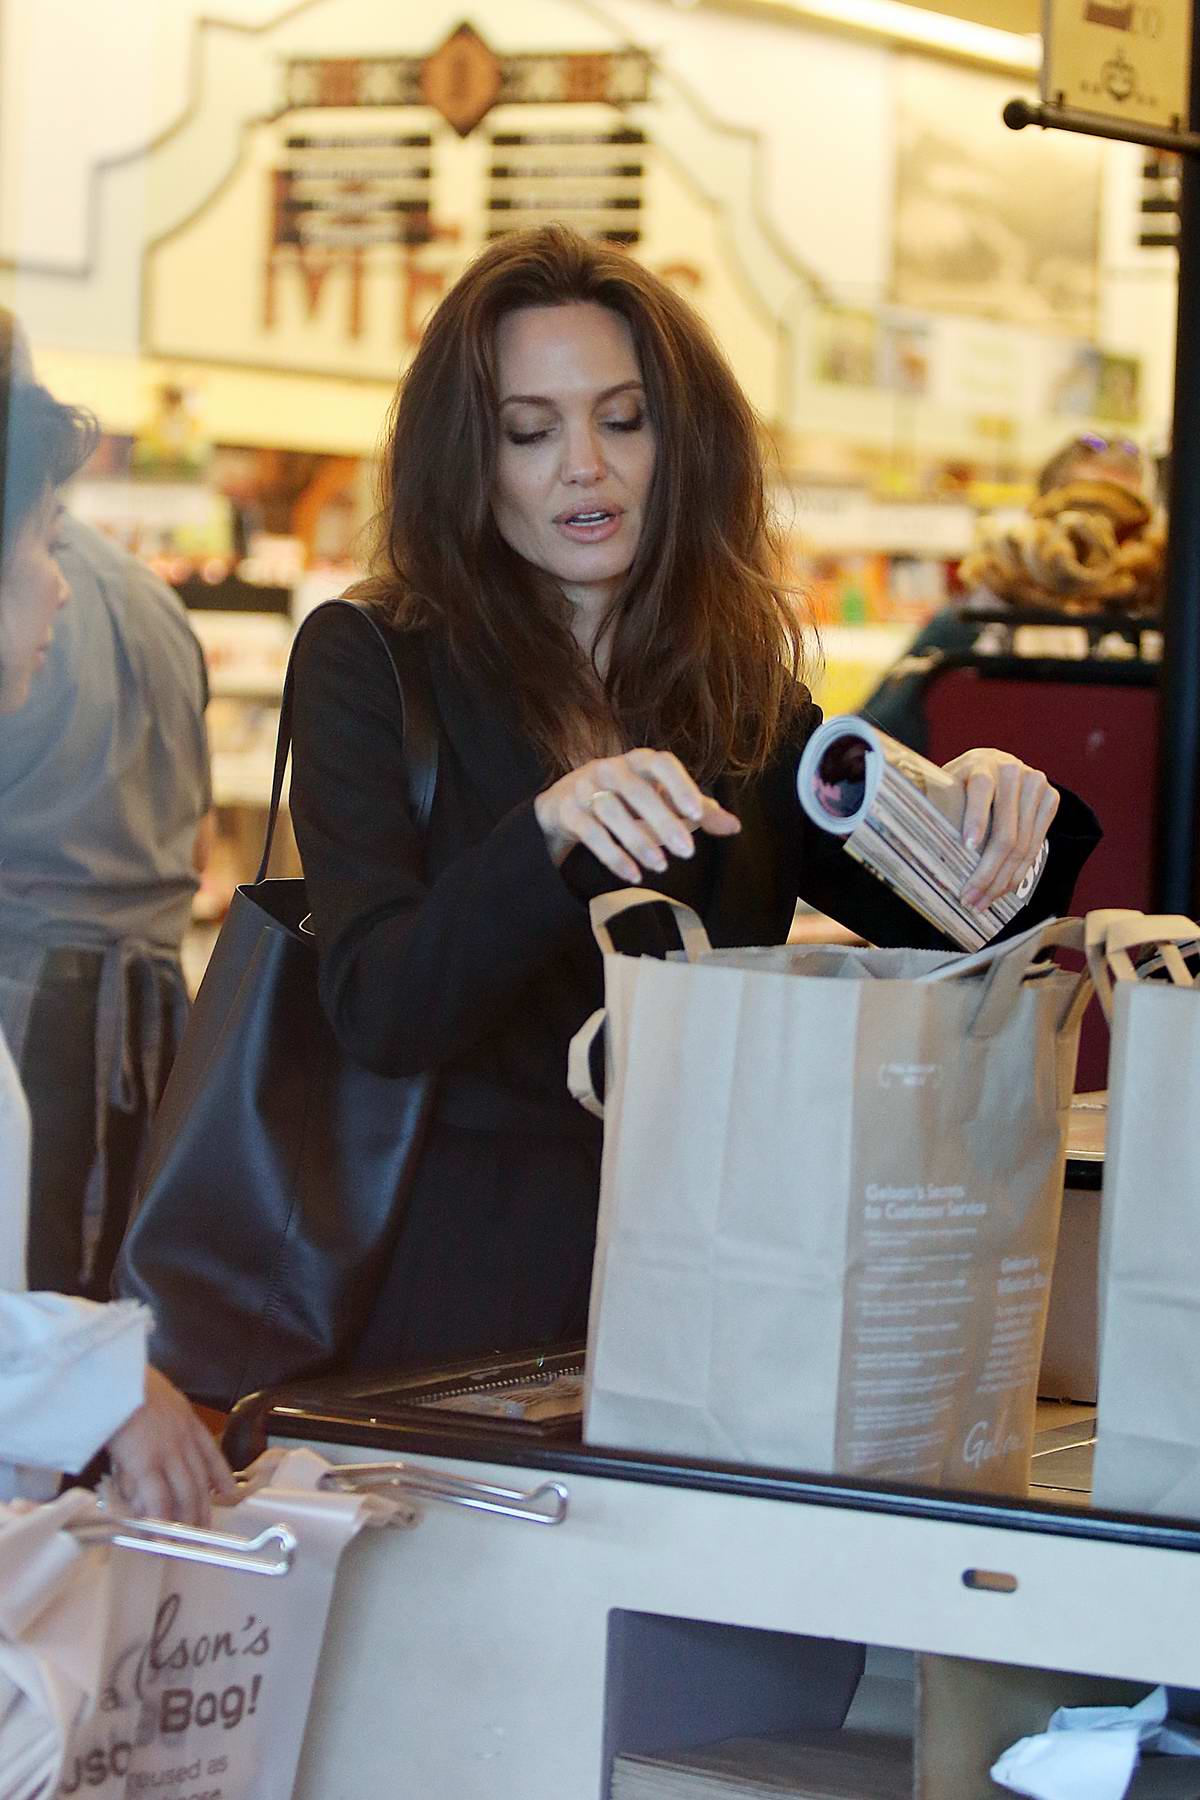 Angelina Jolie Spends Her Saturday Shopping in L.A.: Photo 4330466